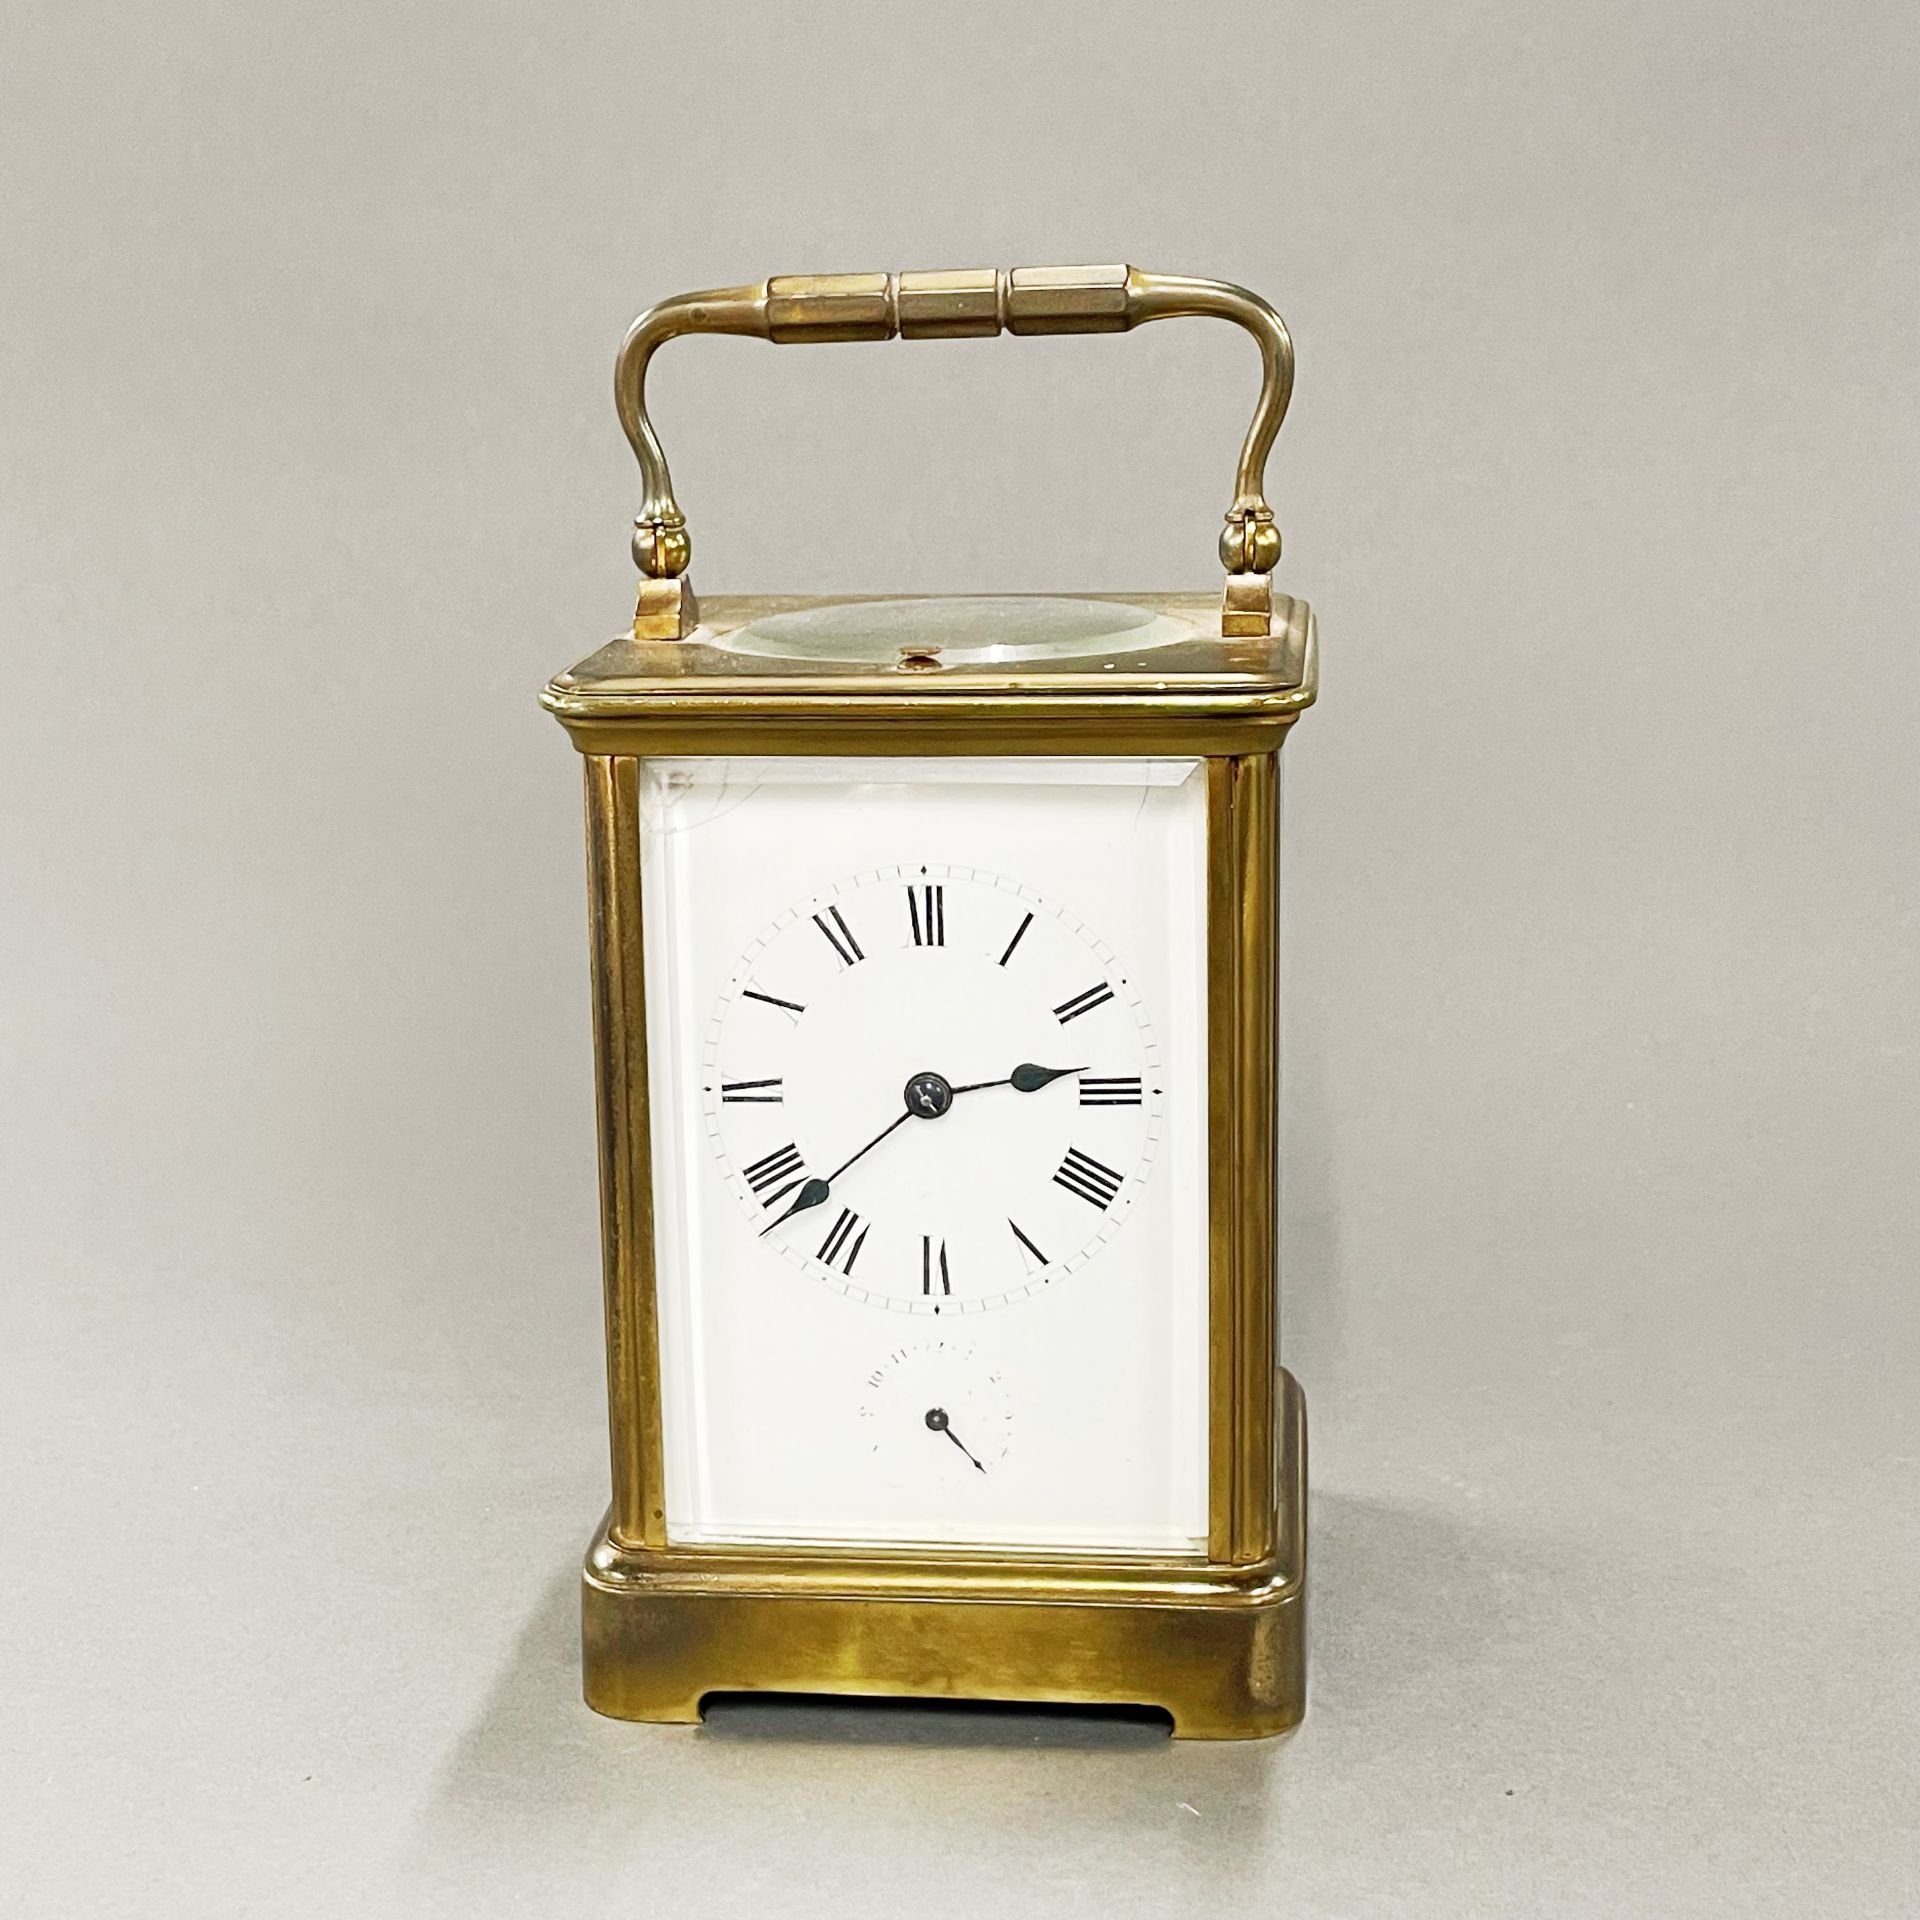 A French brass alarm carriage clock by Richard et cie, Paris in London, H. 18cm, understood to be in